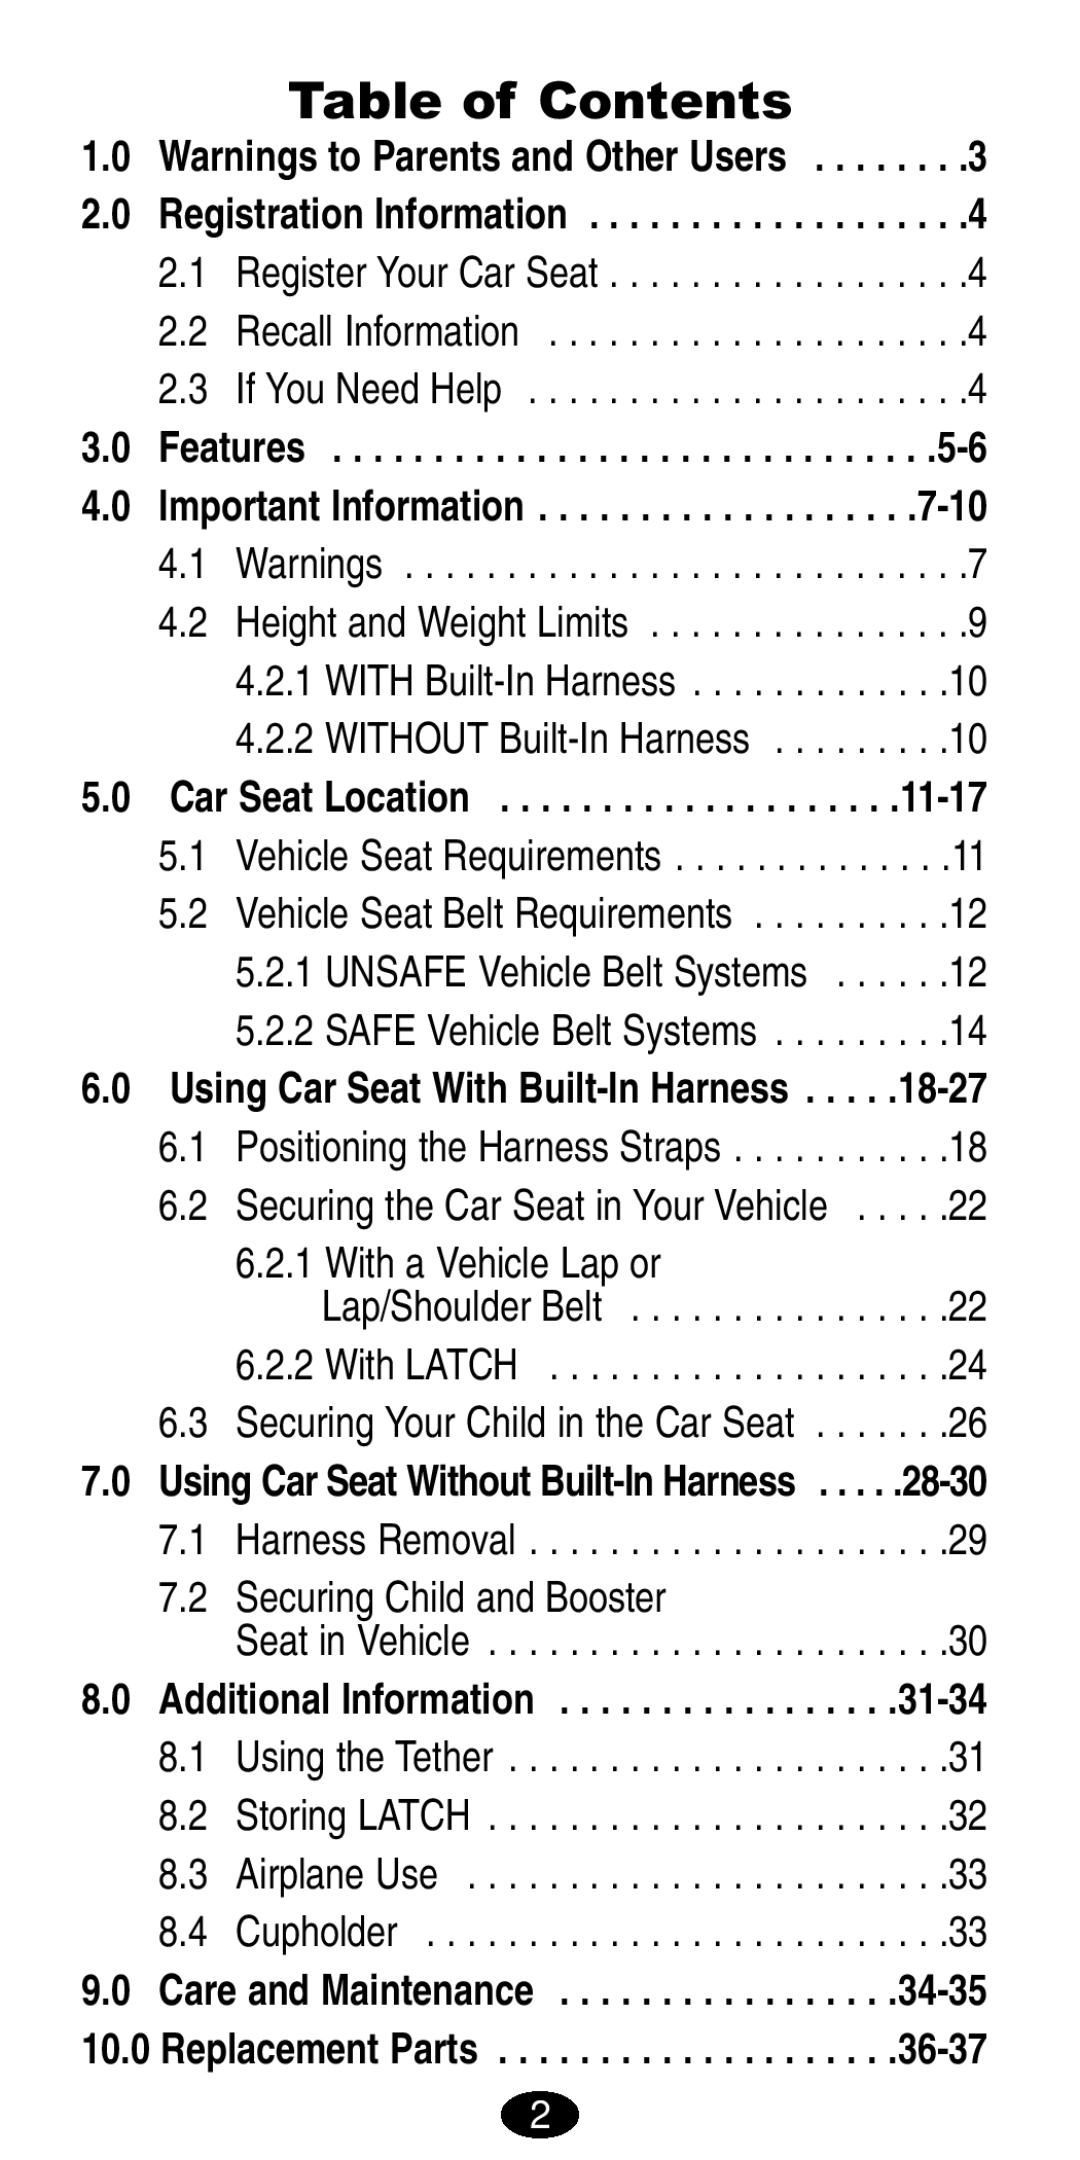 Graco 8490 Table of Contents, With a Vehicle Lap or, Securing Child and Booster, Car Seat Location, Additional Information 